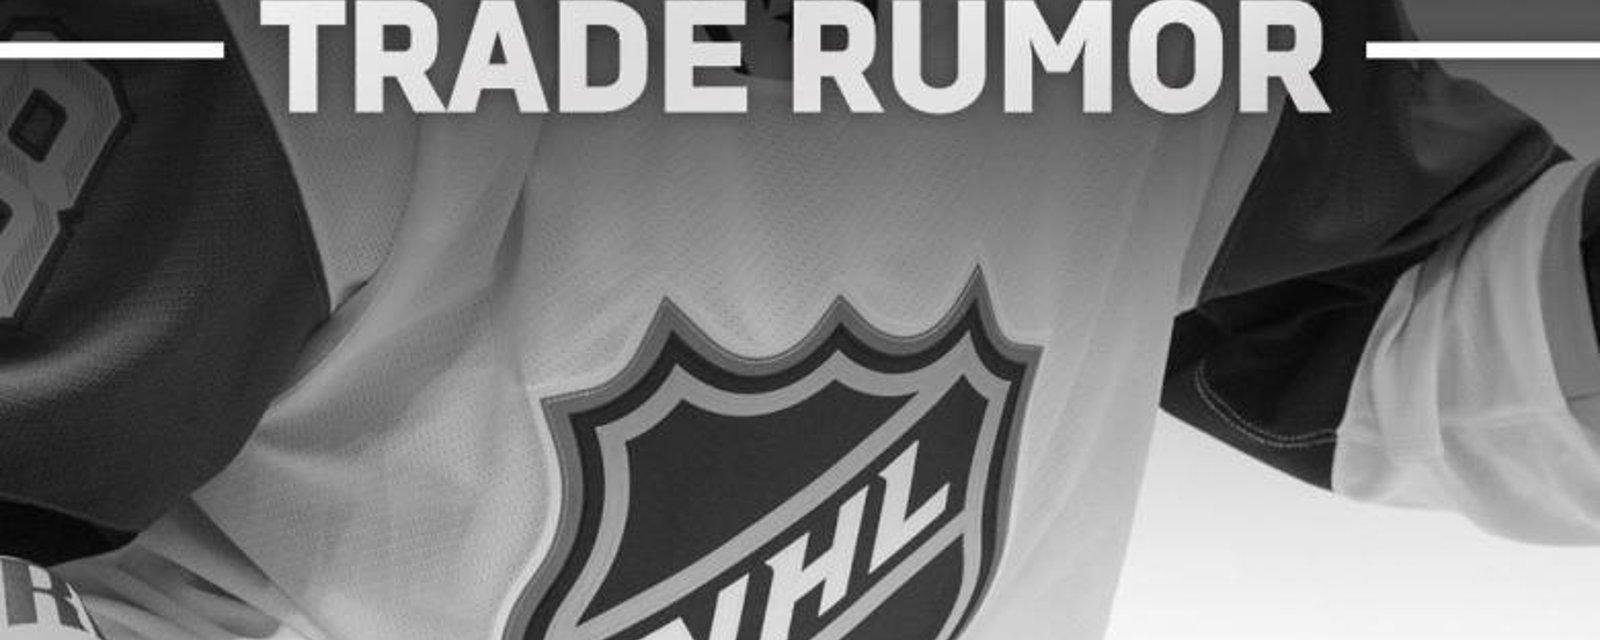 Rumor:Former first overall draft pick back on the trading block.